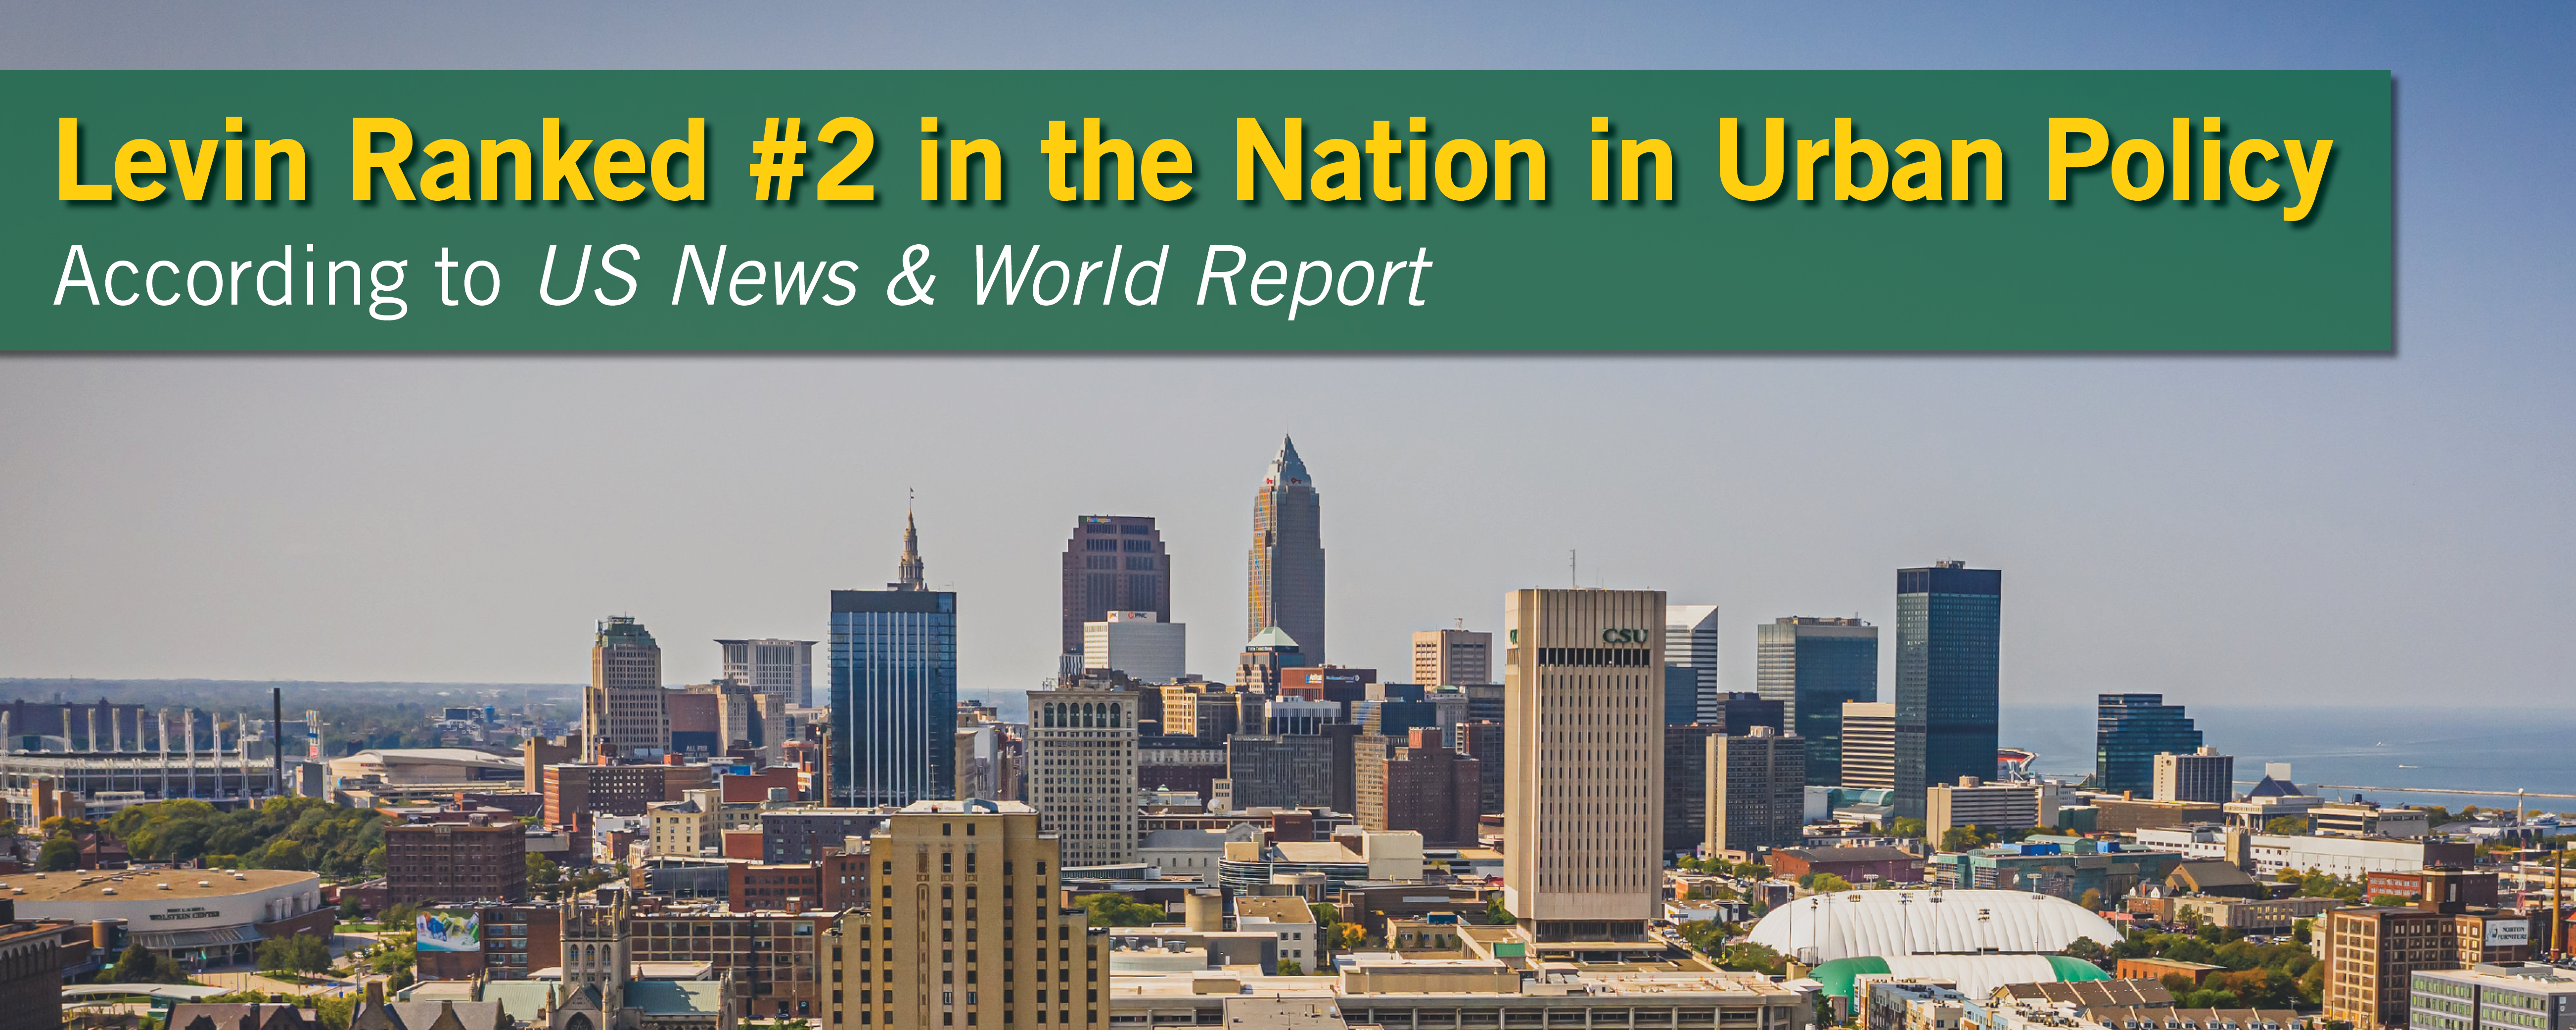 Levin Ranked 2nd in the Nation in Urban Policy